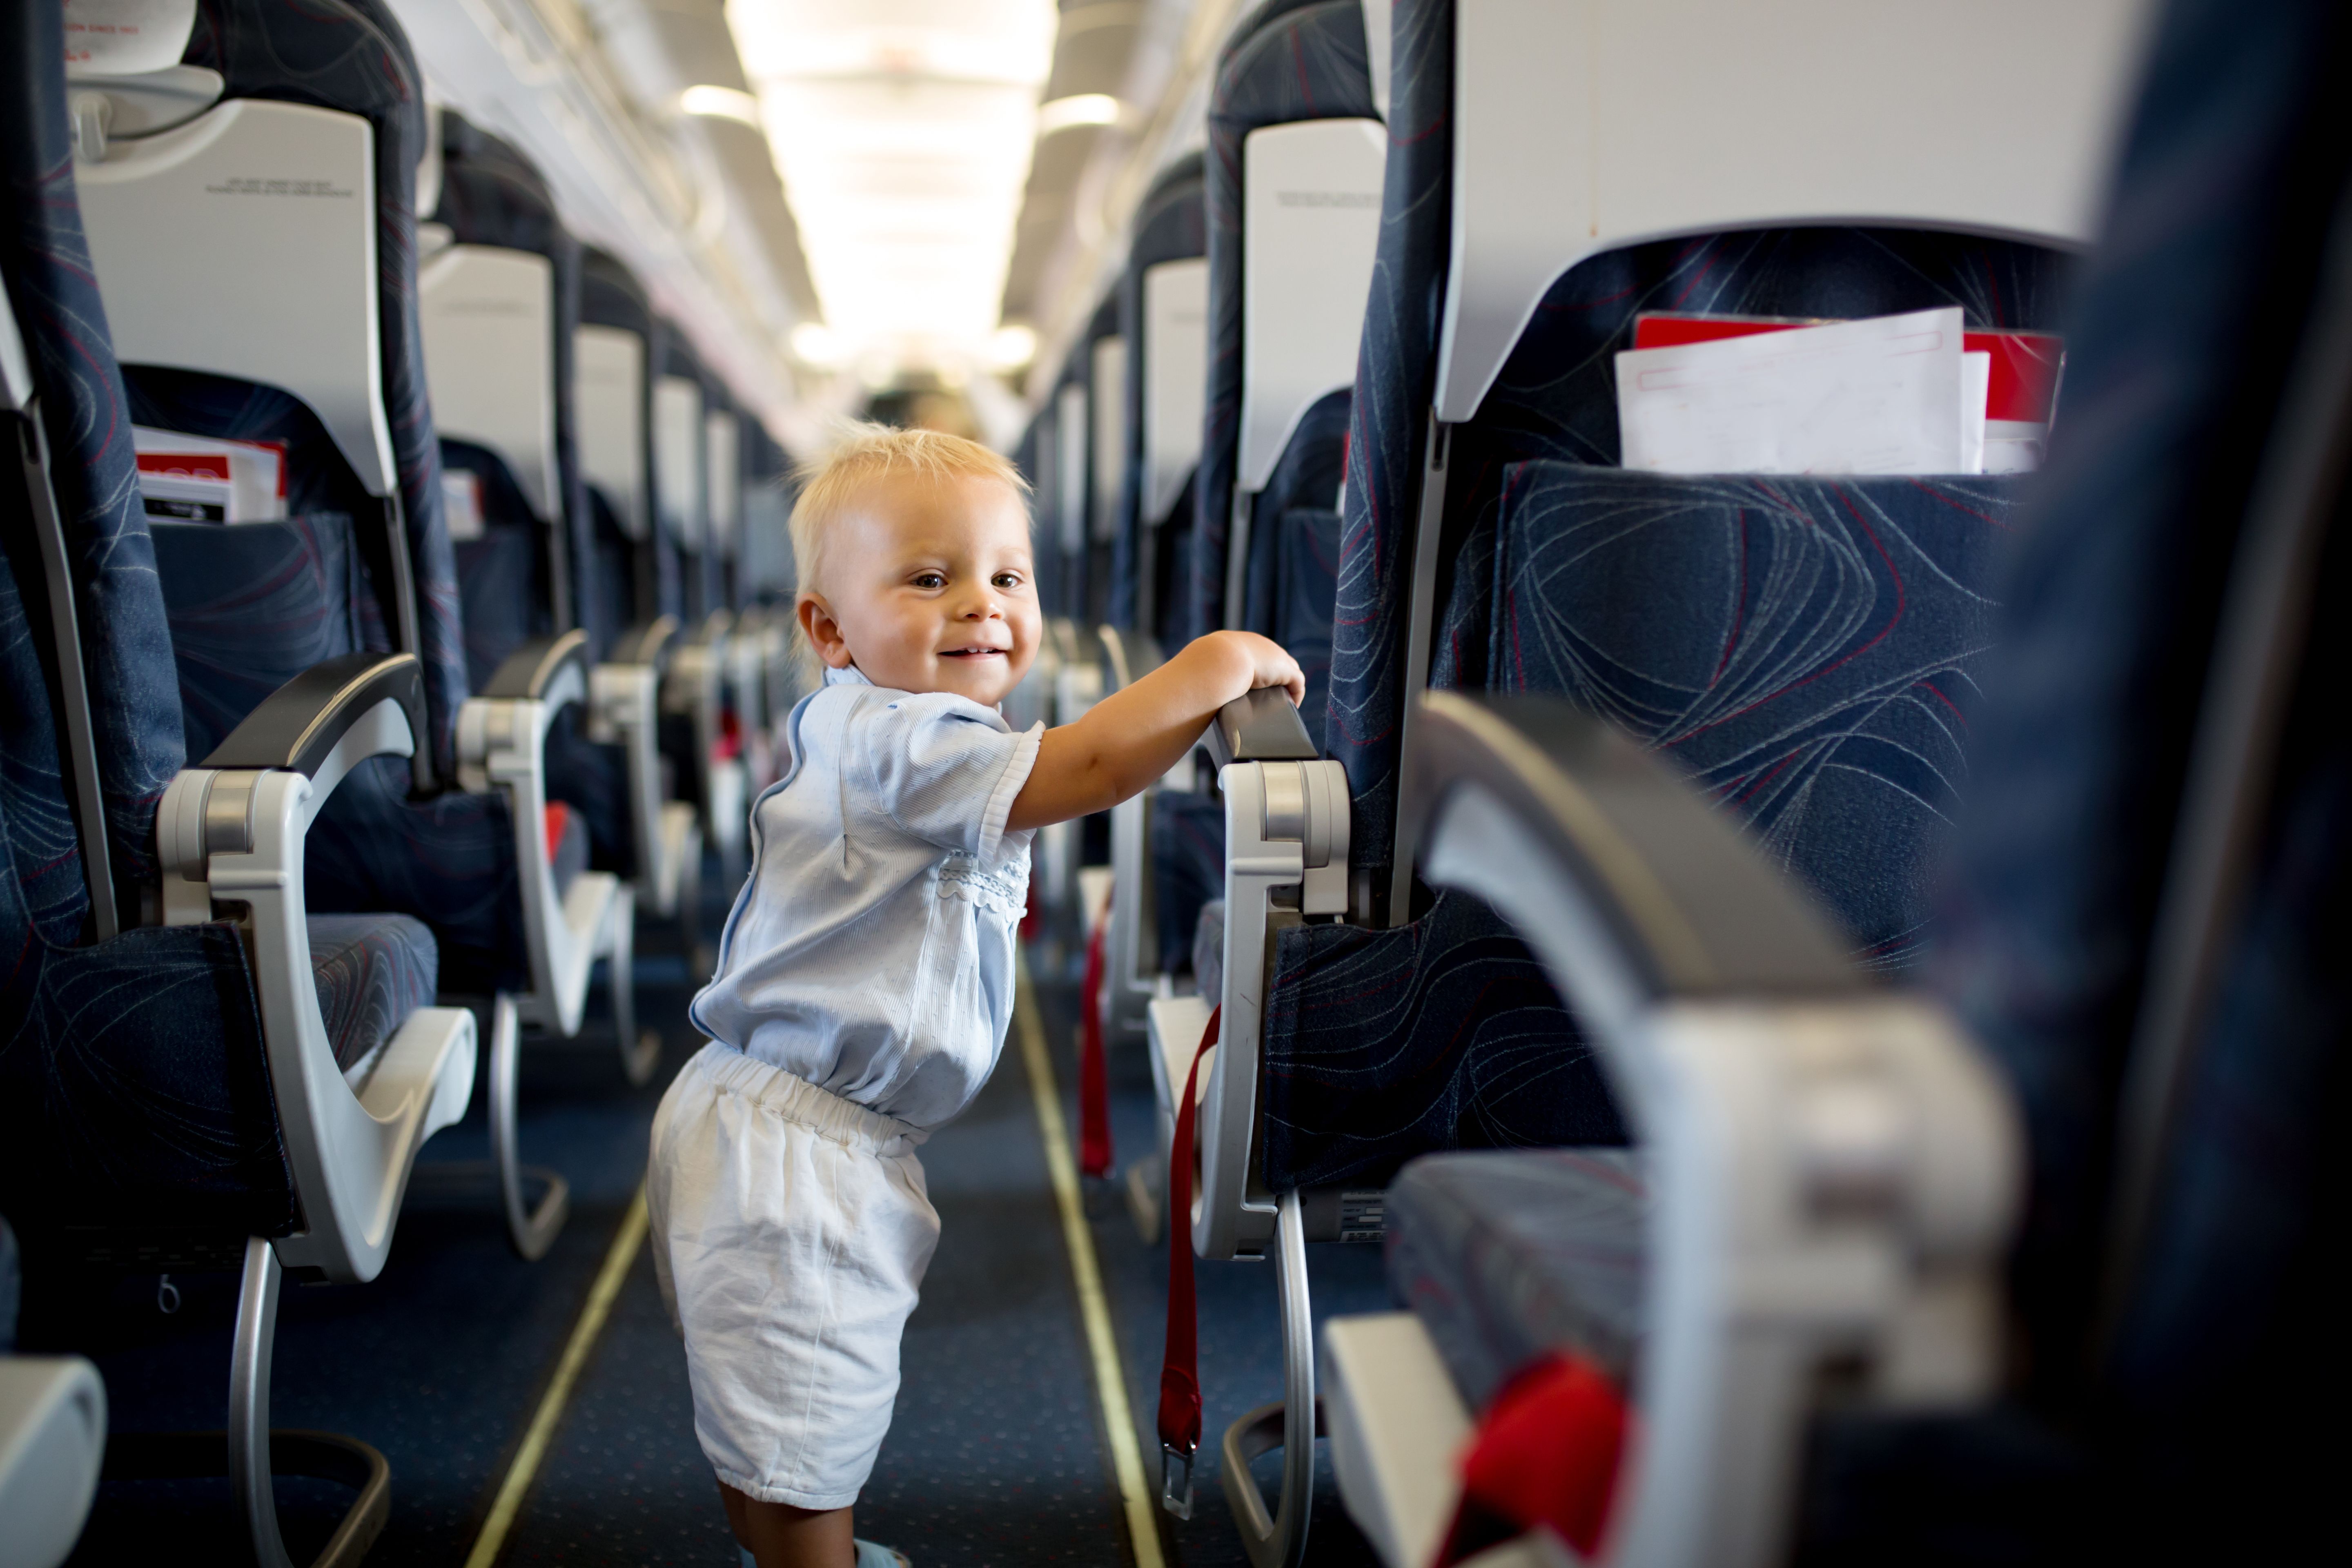 Child in airplane aisle